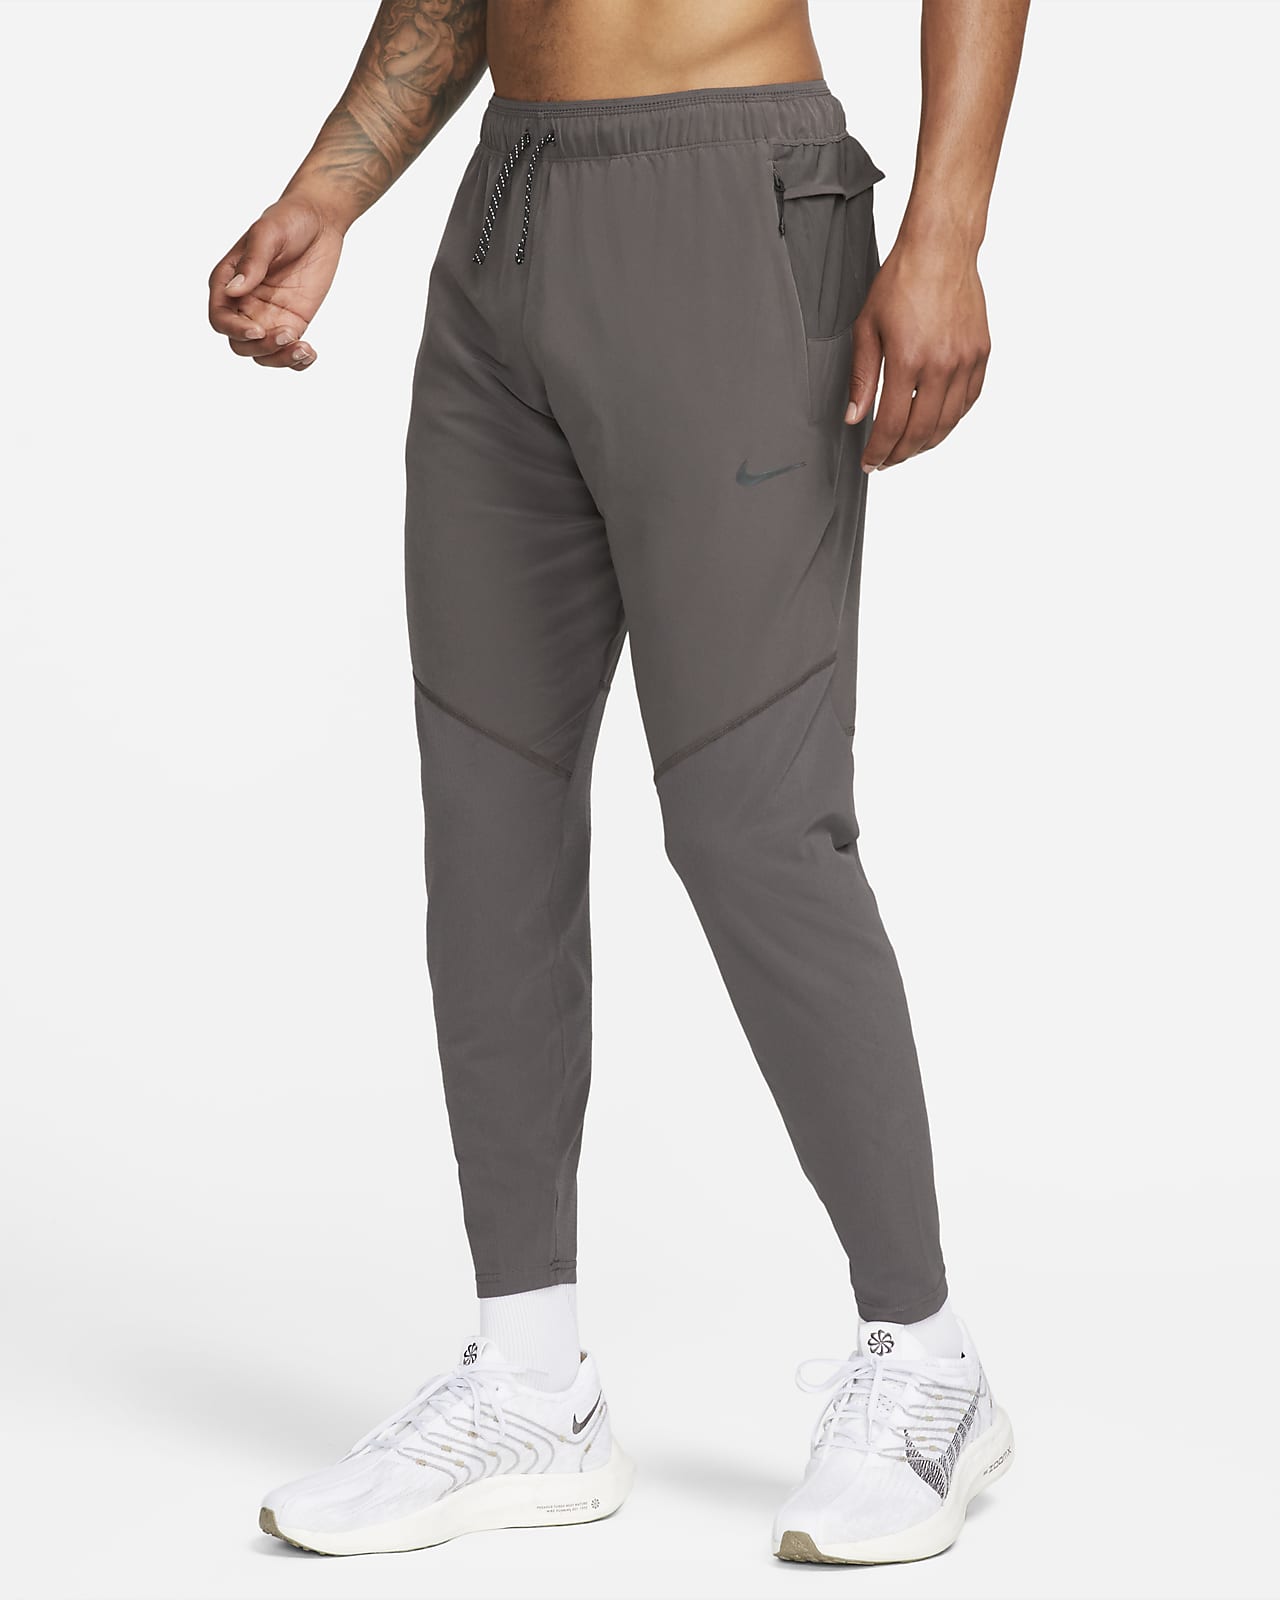 Discounted Mens Running Pants  Tights  Macron Outlet UK